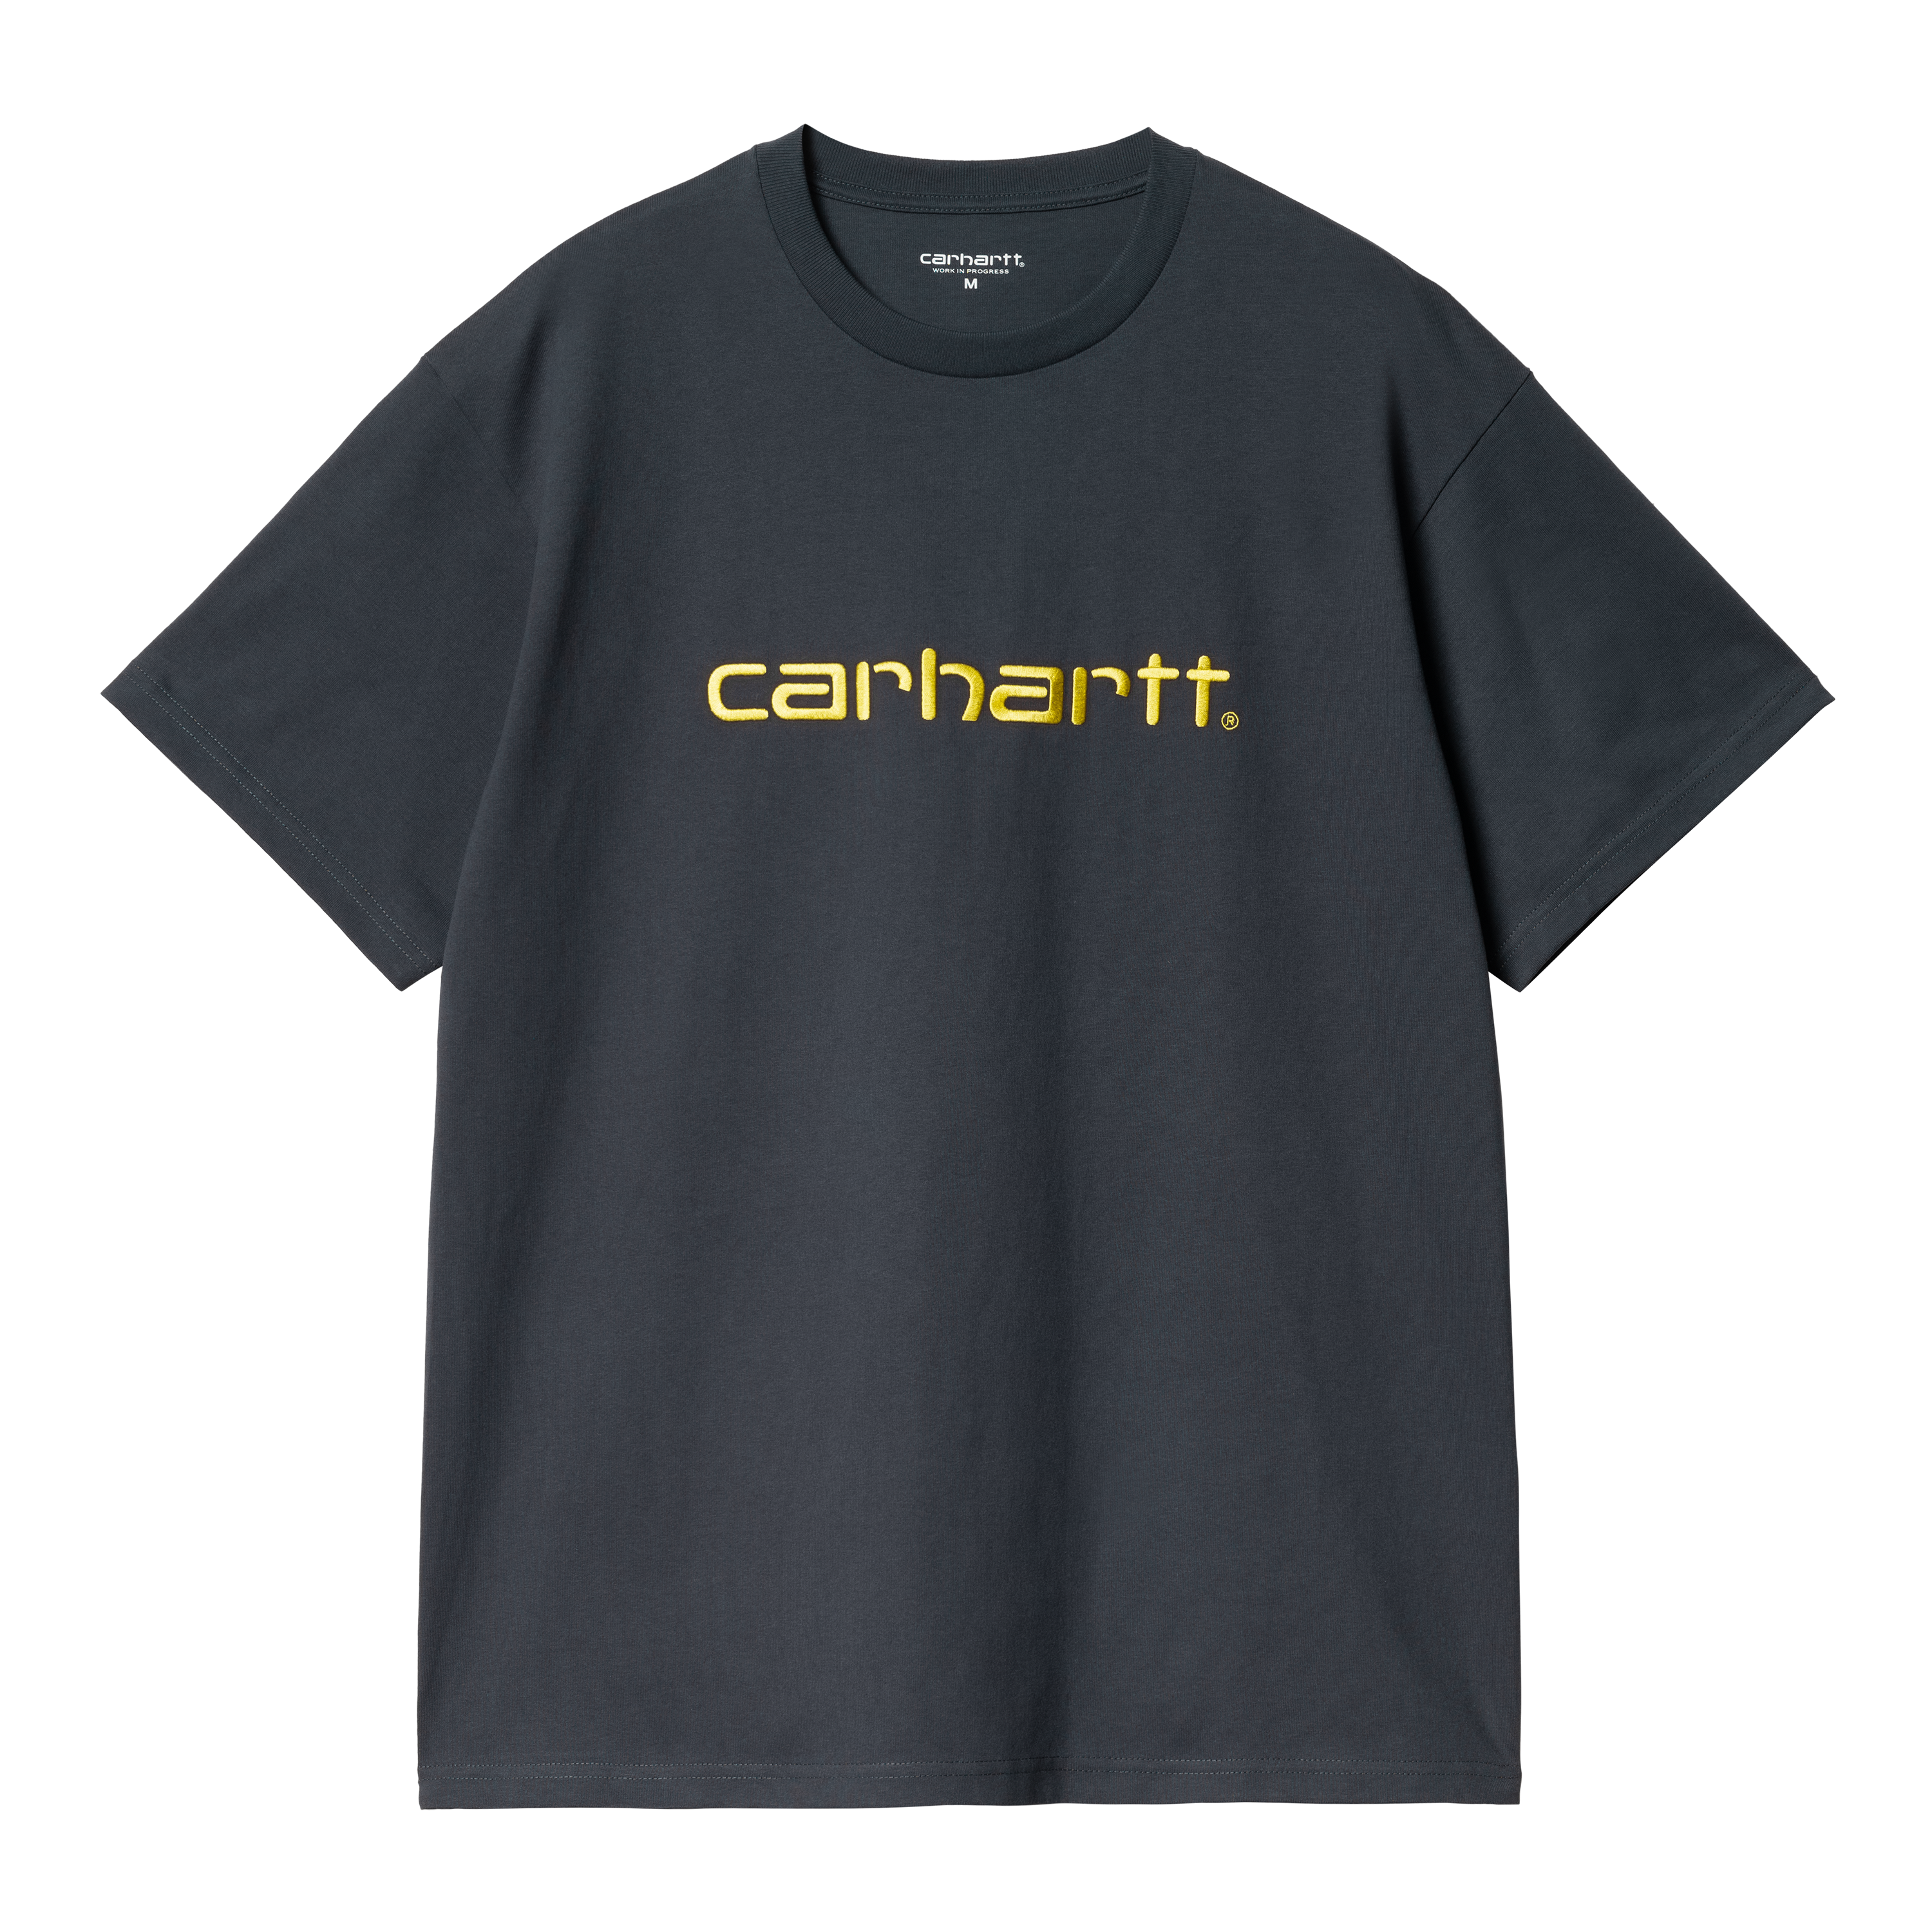 Carhartt WIP Men＇s Featured S/S24 Store Exclusives | Official Online Store